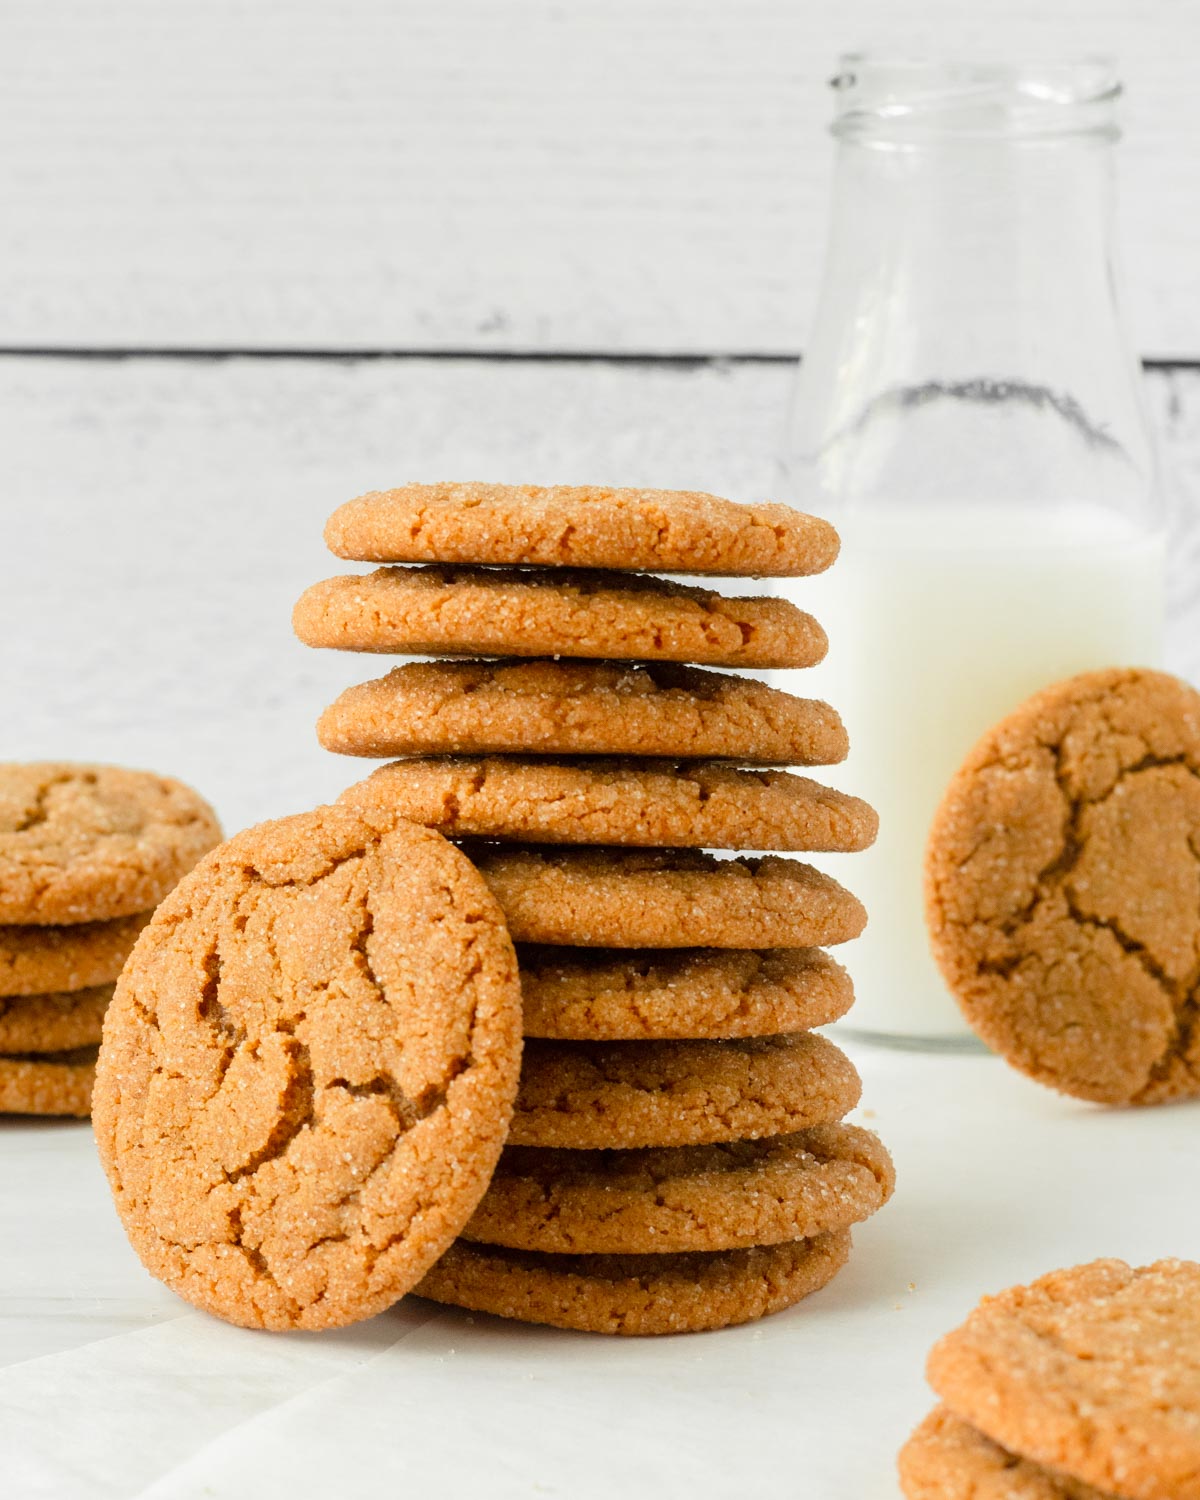 These molasses cookies are a classic Christmas cookie made with a flavorful dough filled with molasses, brown sugar, and warm spices. Make these classic Christmas cookies on your Christmas cookie baking day to share for the holidays.